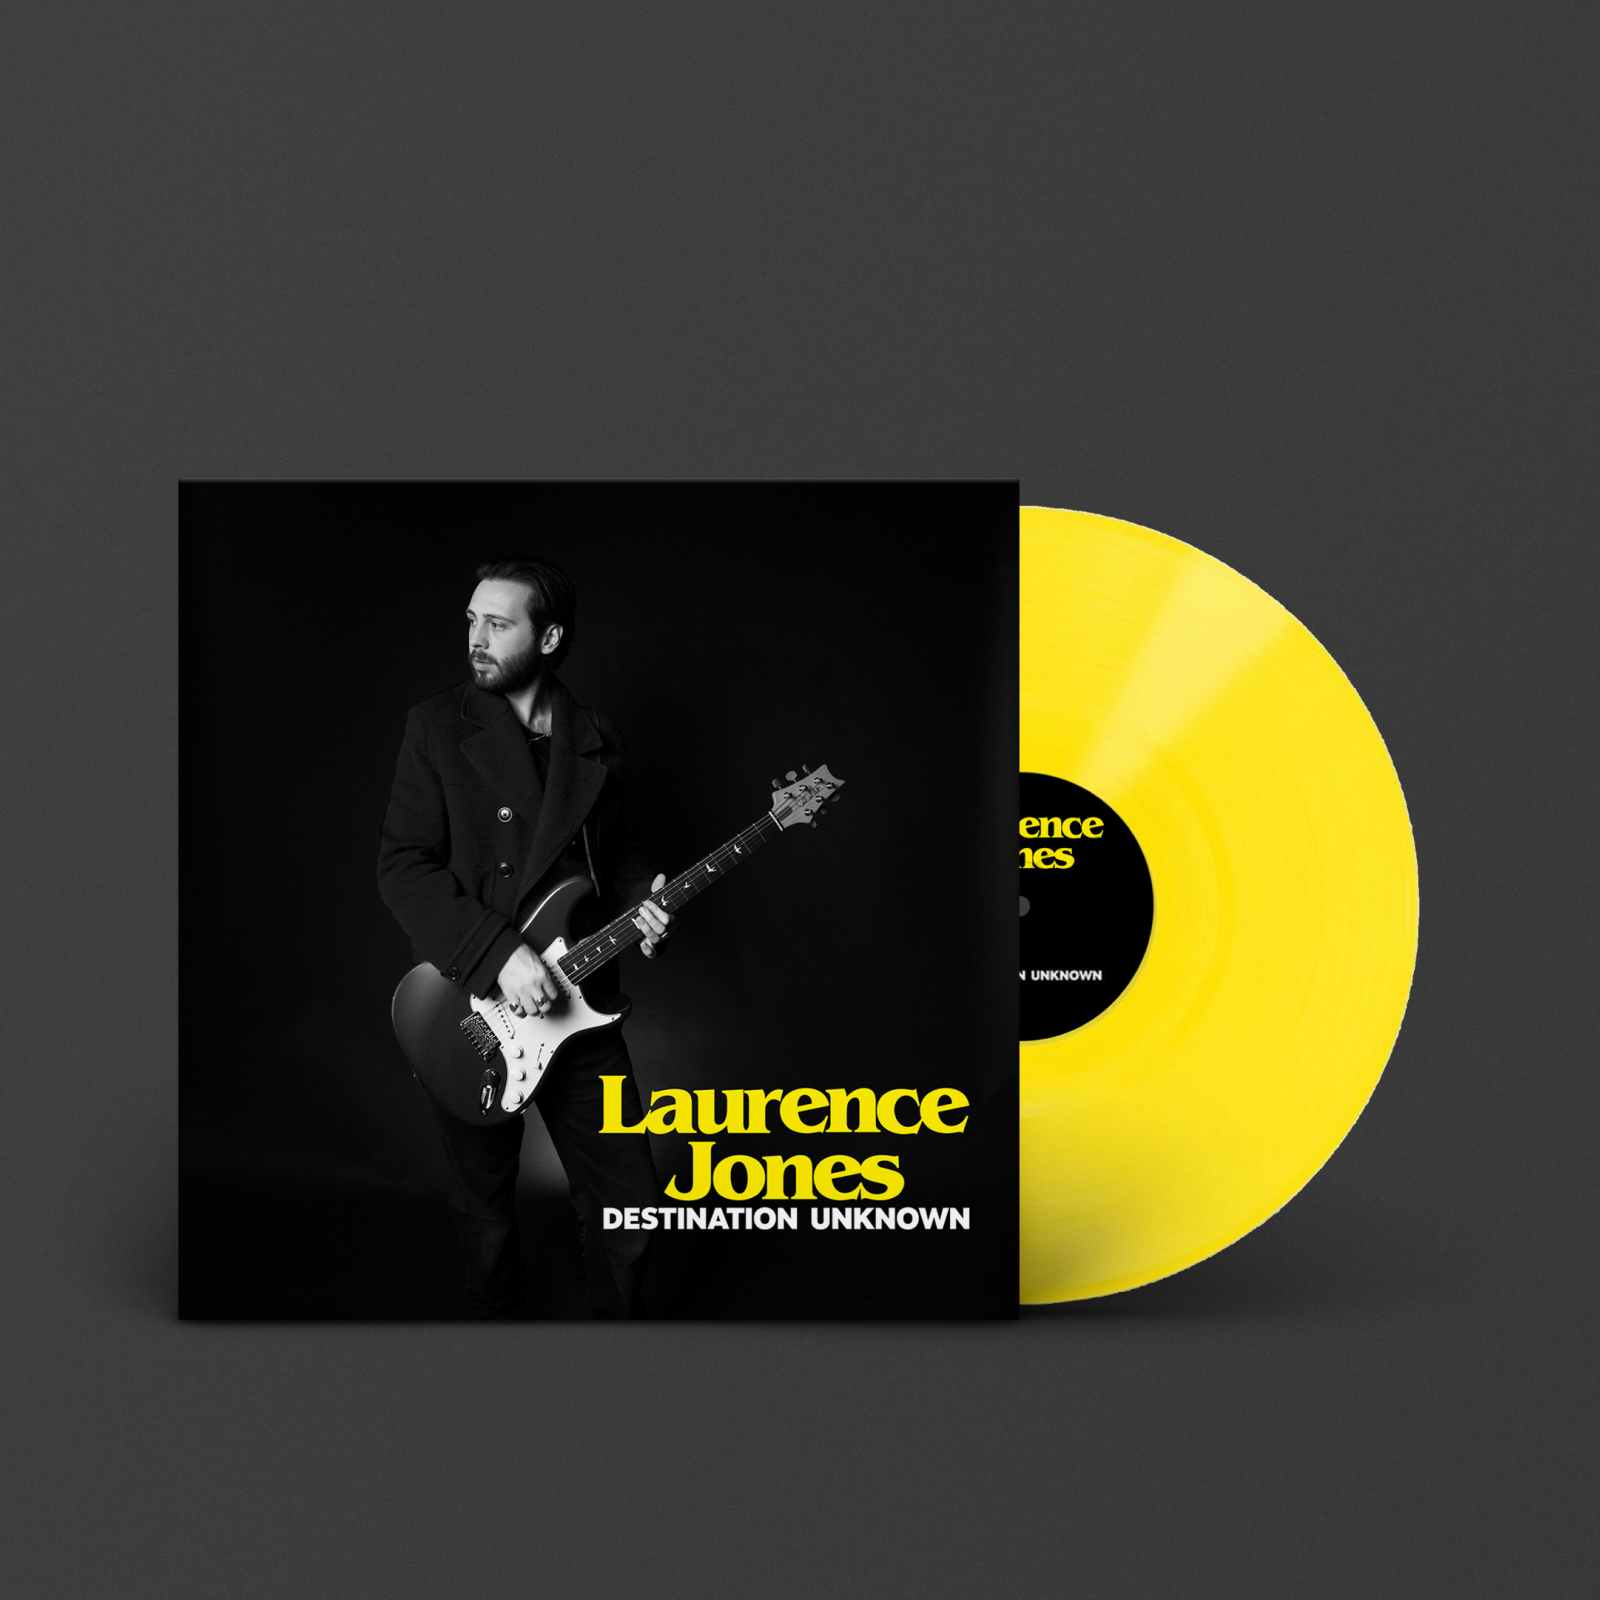 Laurence Jones playing on a DESTINATION UNKNOWN, LAURENCE JONES yellow vinyl by Marshall.